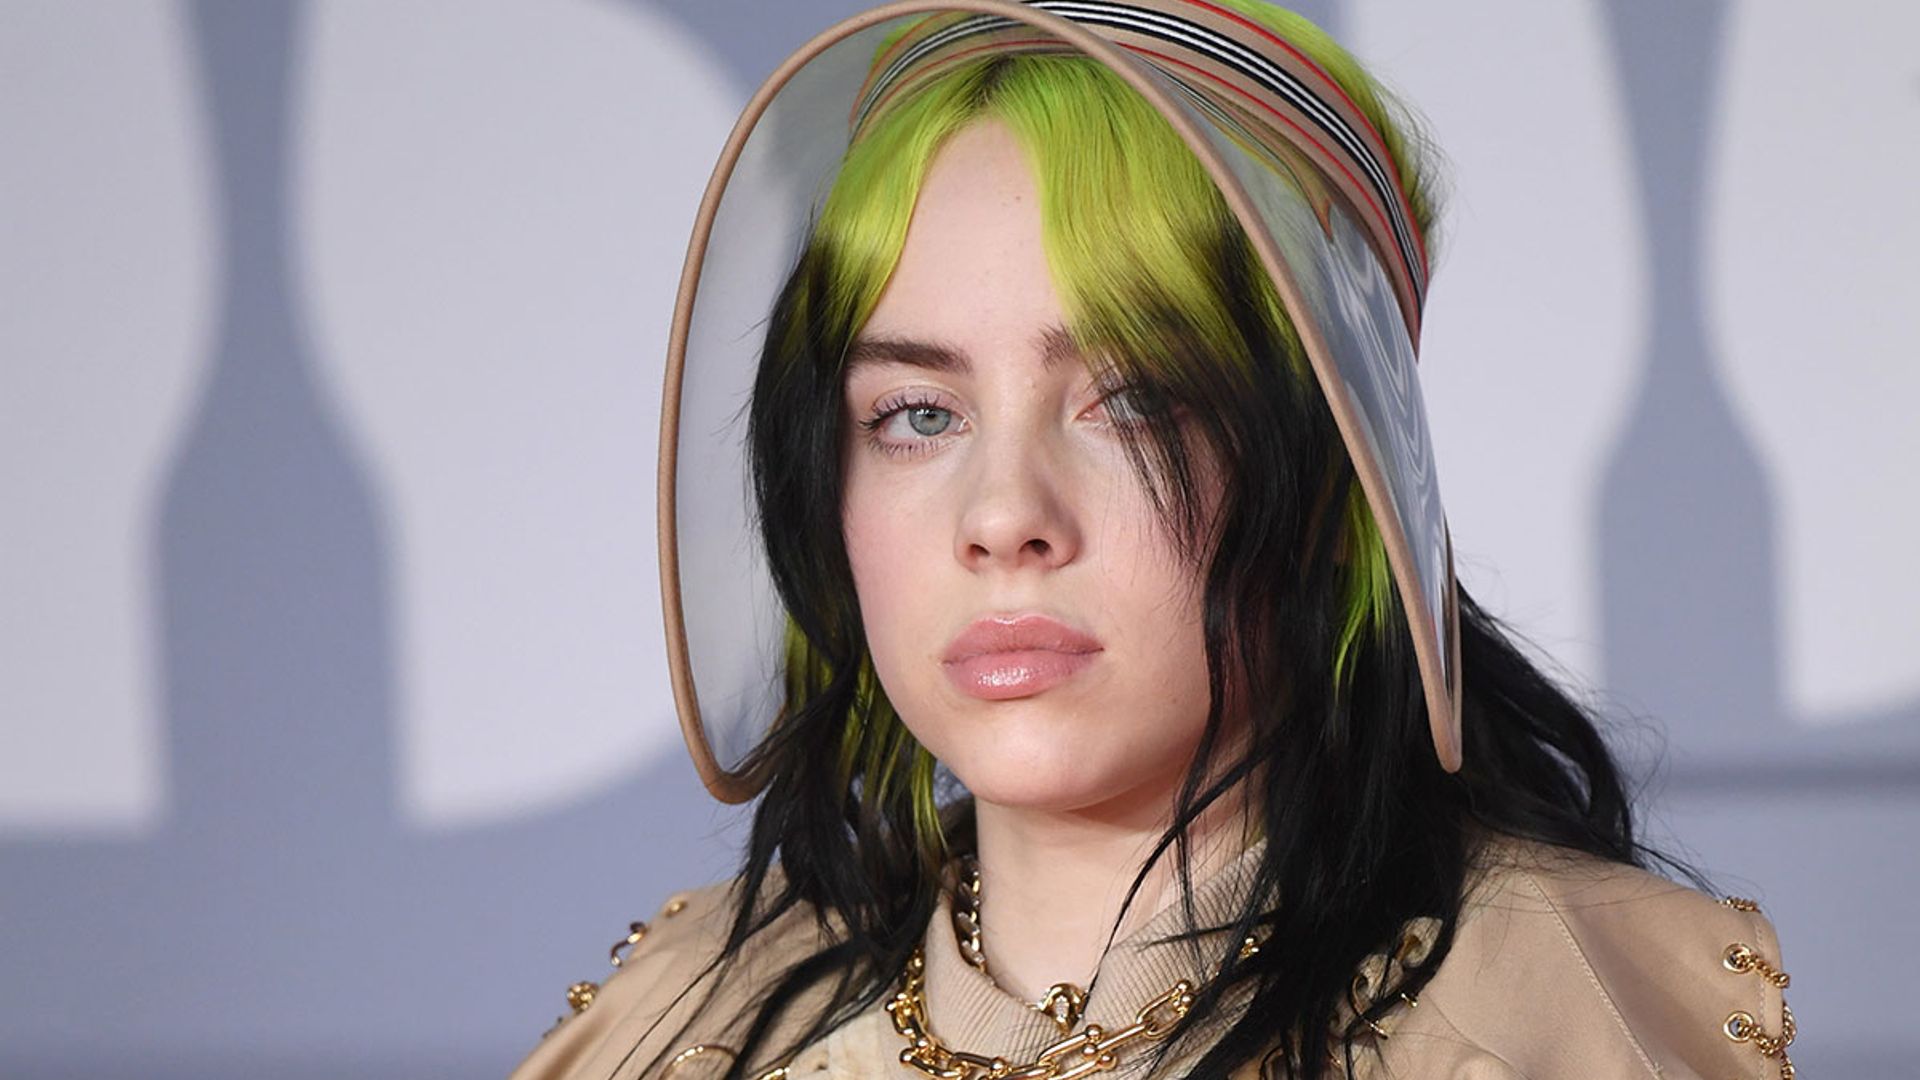 Billie Eilish responds to trolls by stripping off in new short film 'Not My Responsibility'